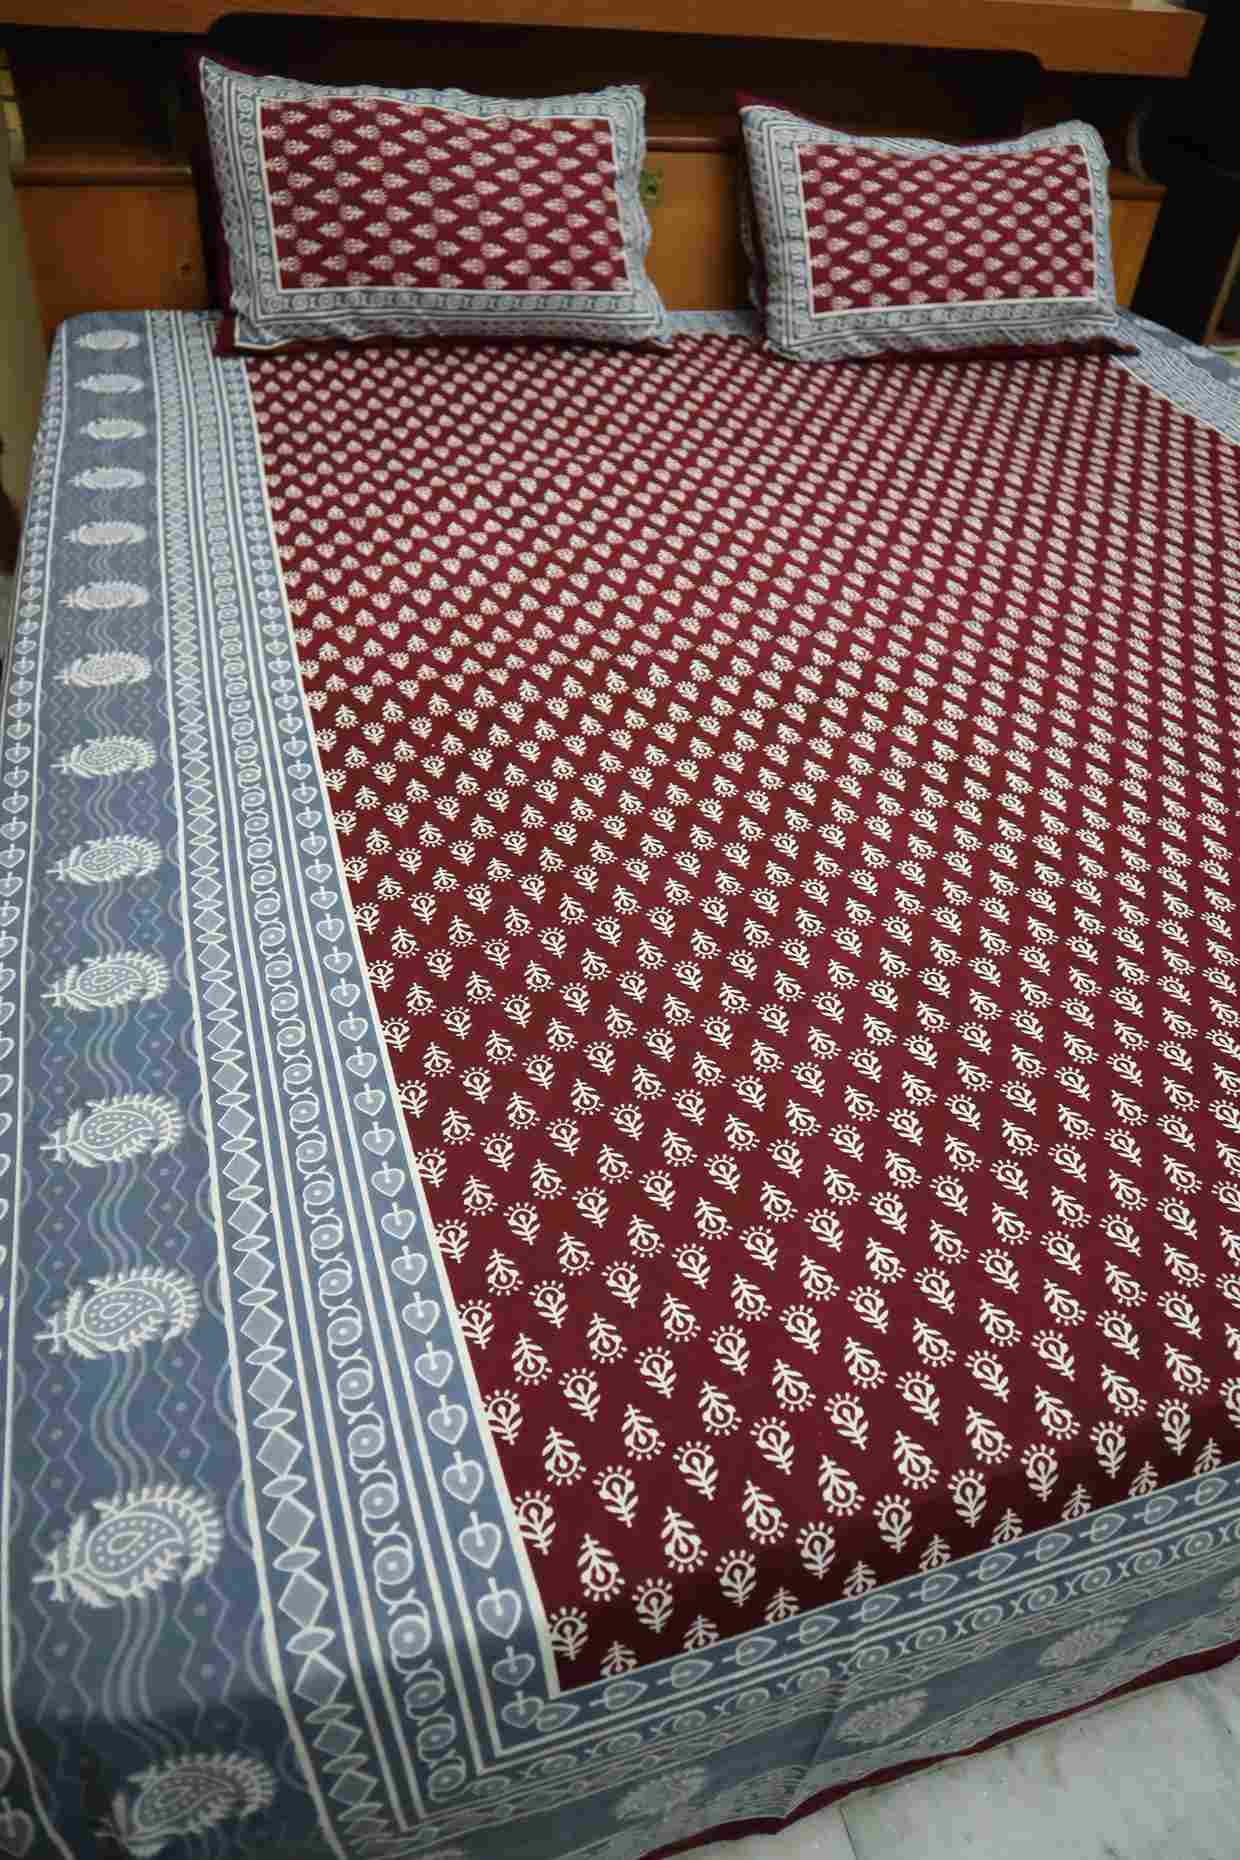 Maroon Pure Cotton Jaipuri Bedsheets for Double Bed with Pillow Covers, 90" x 108" King Size, 180 TC, Breathable and Skin Friendly